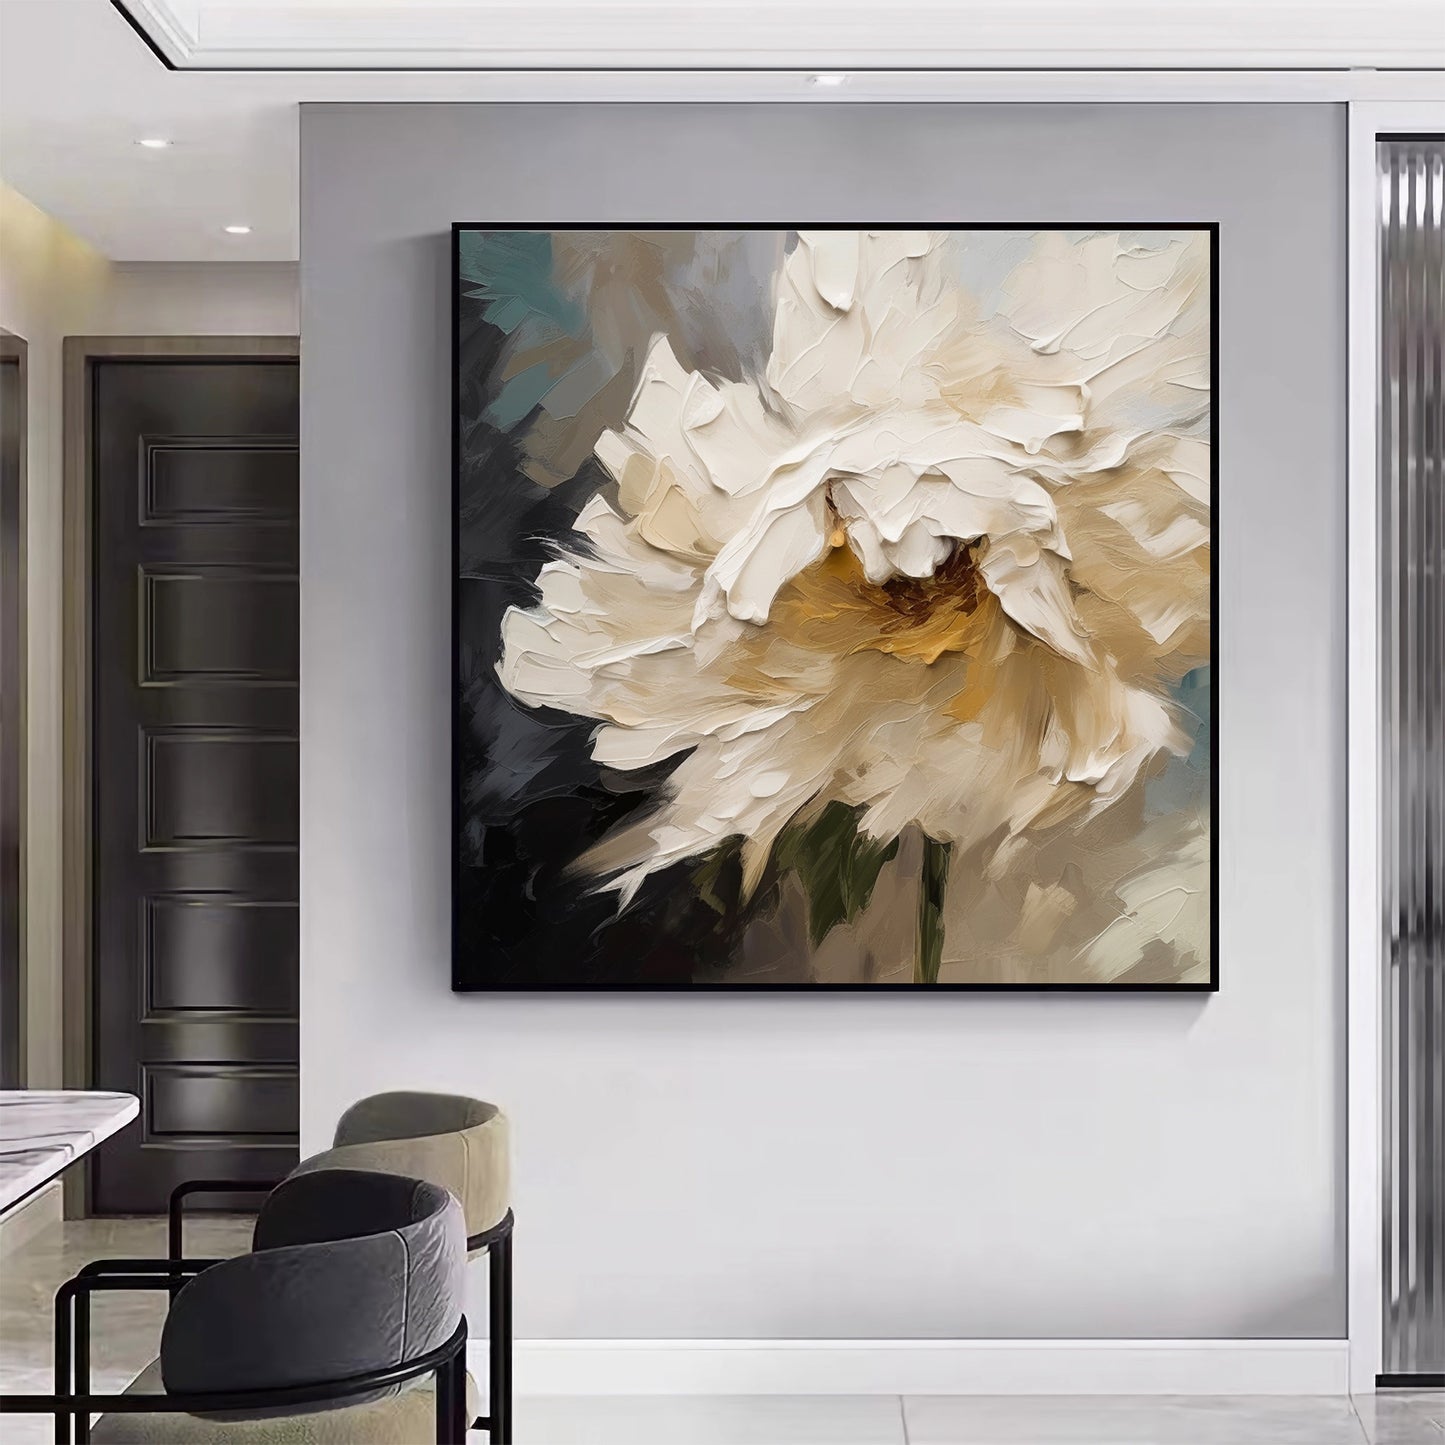 Texture Wall Decor Home Decor Gift Abstract Floral Painting  F0416BRT2398